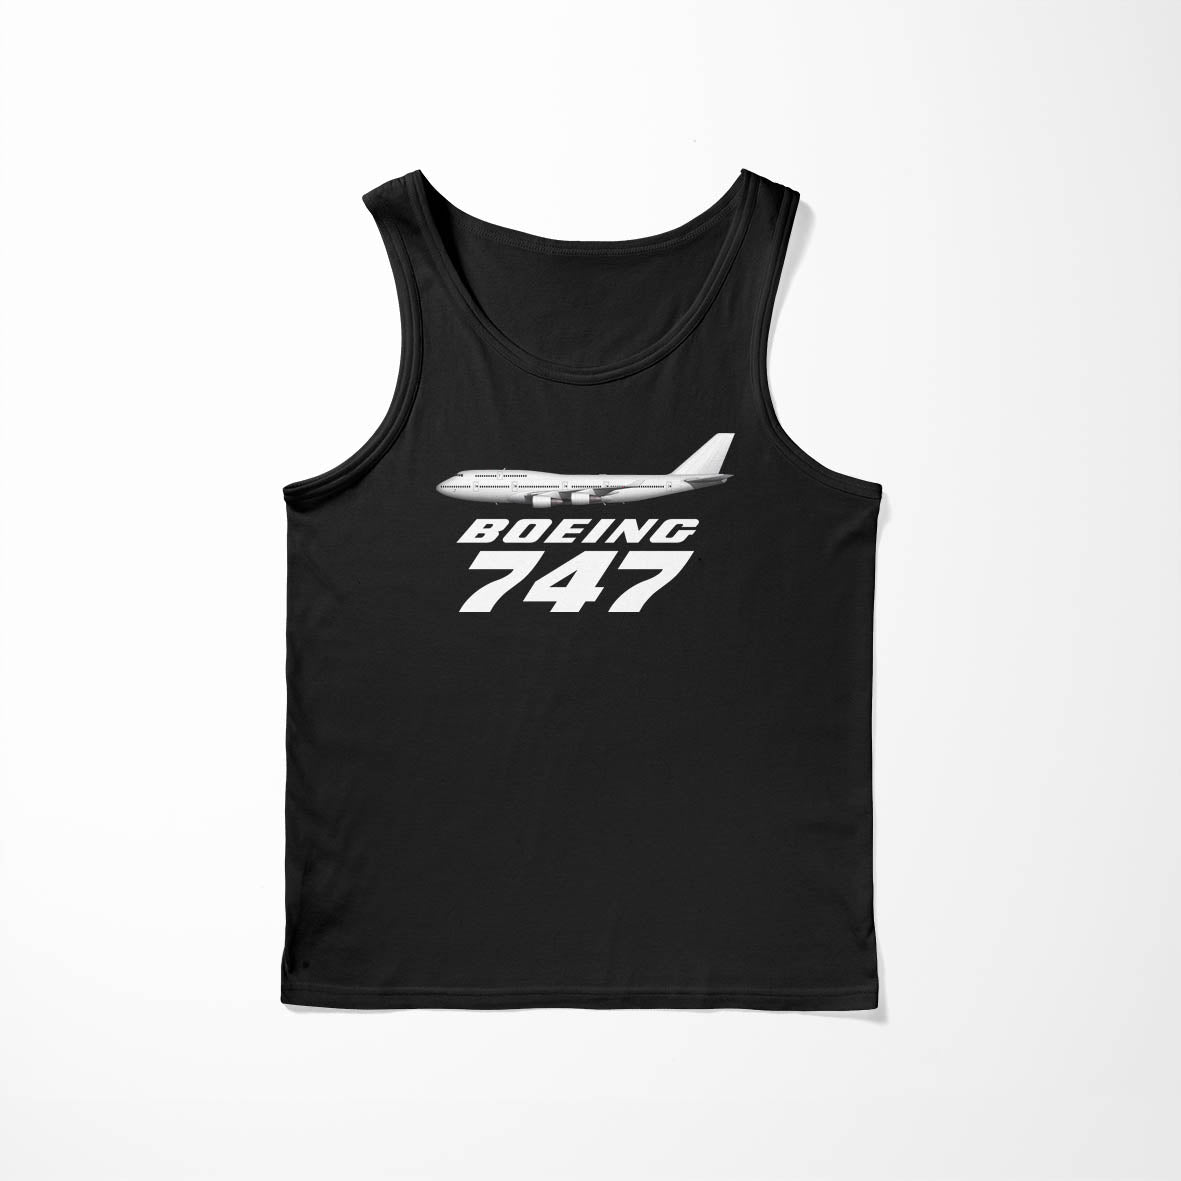 The Boeing 747 Designed Tank Tops